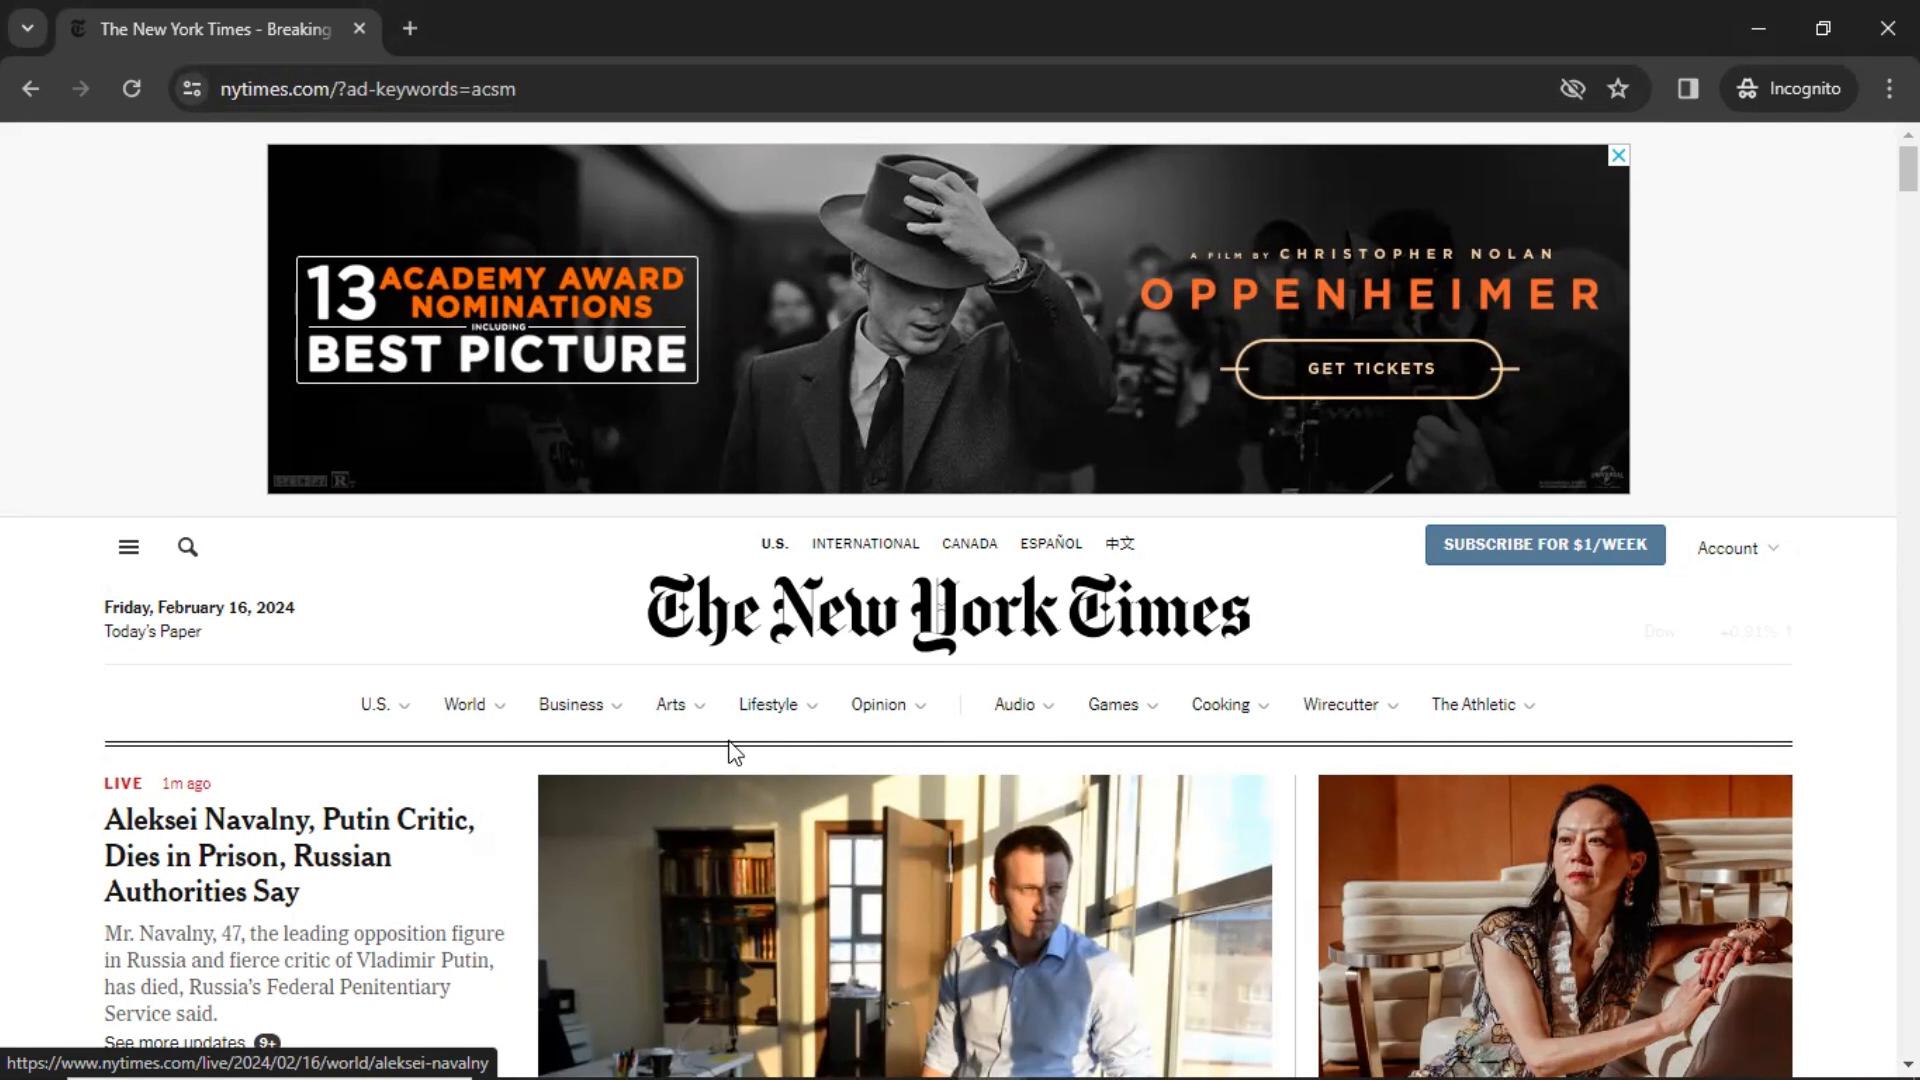 Screenshot of Discovering content on The New York Times